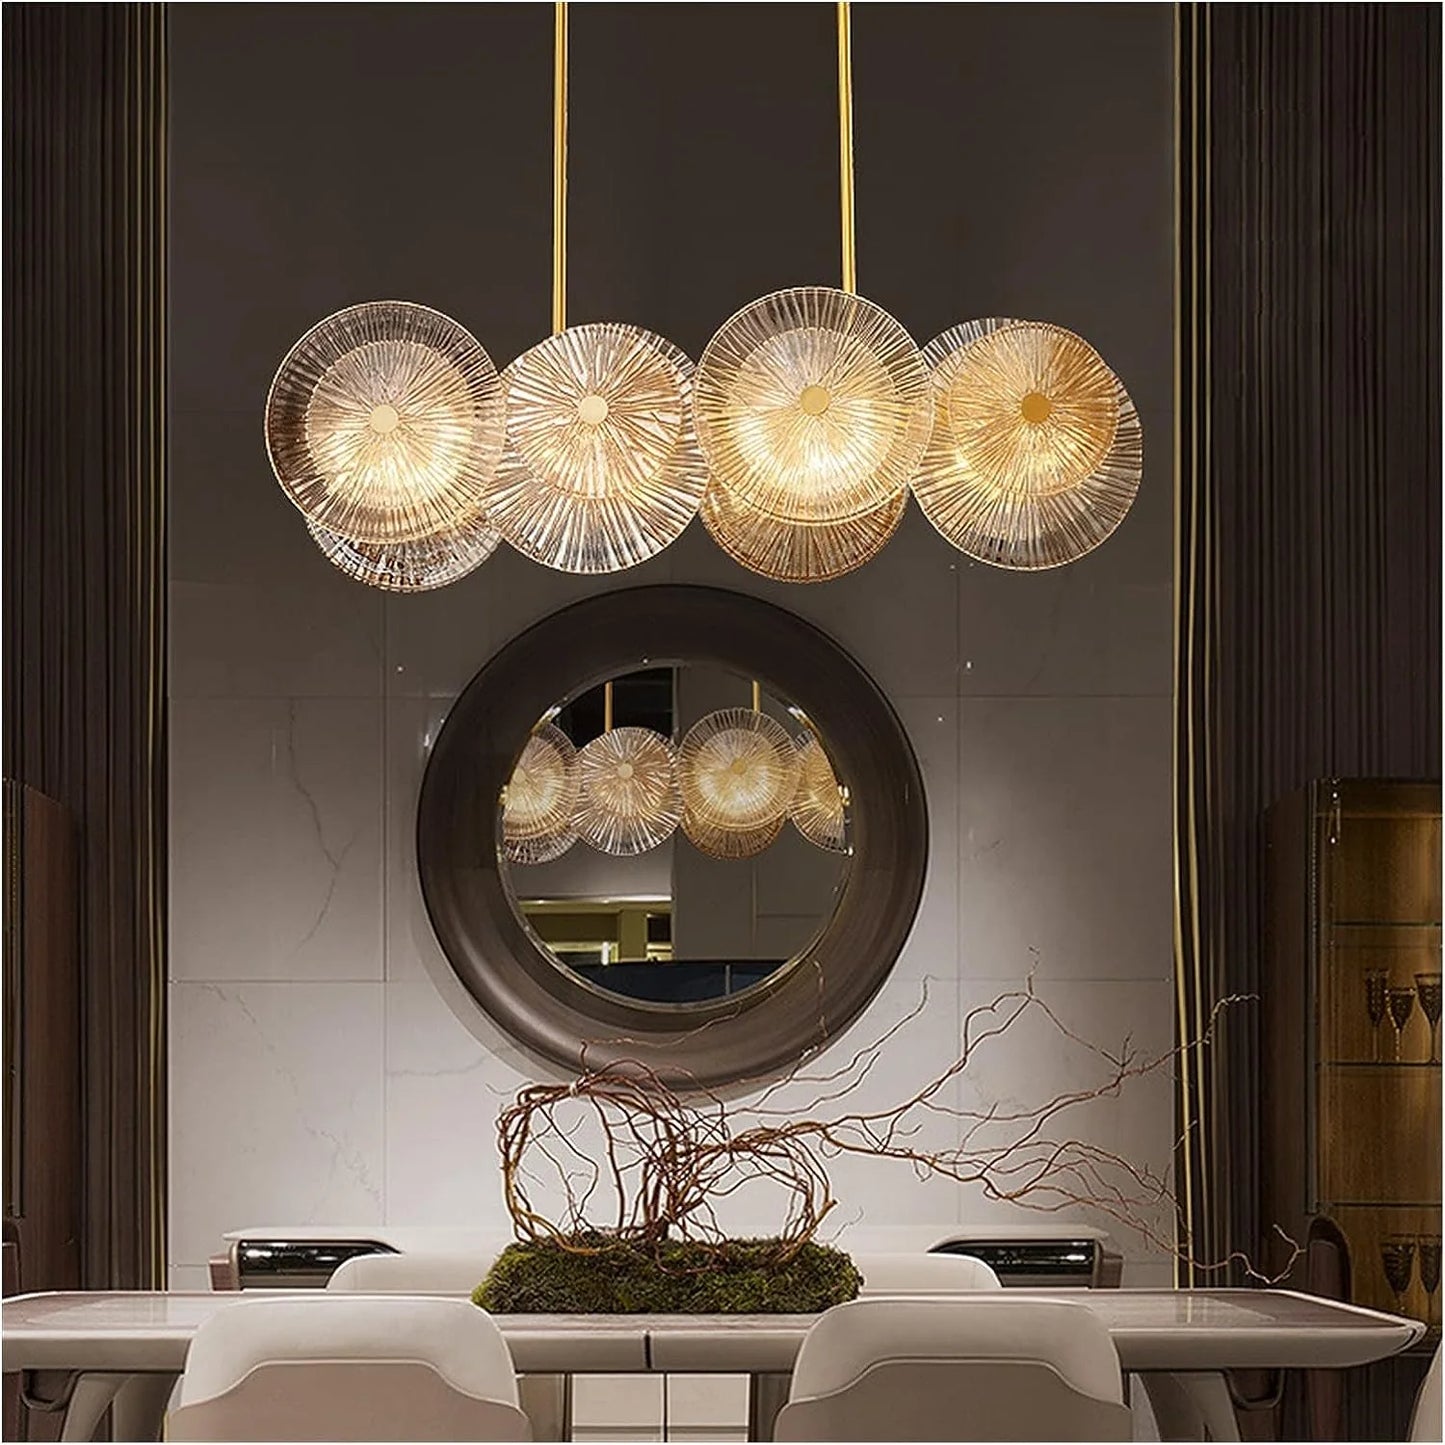 Hdc 1150mm Modern Oval 7-Light Glass Kitchen Island Light with Adjustable Hanging Rods